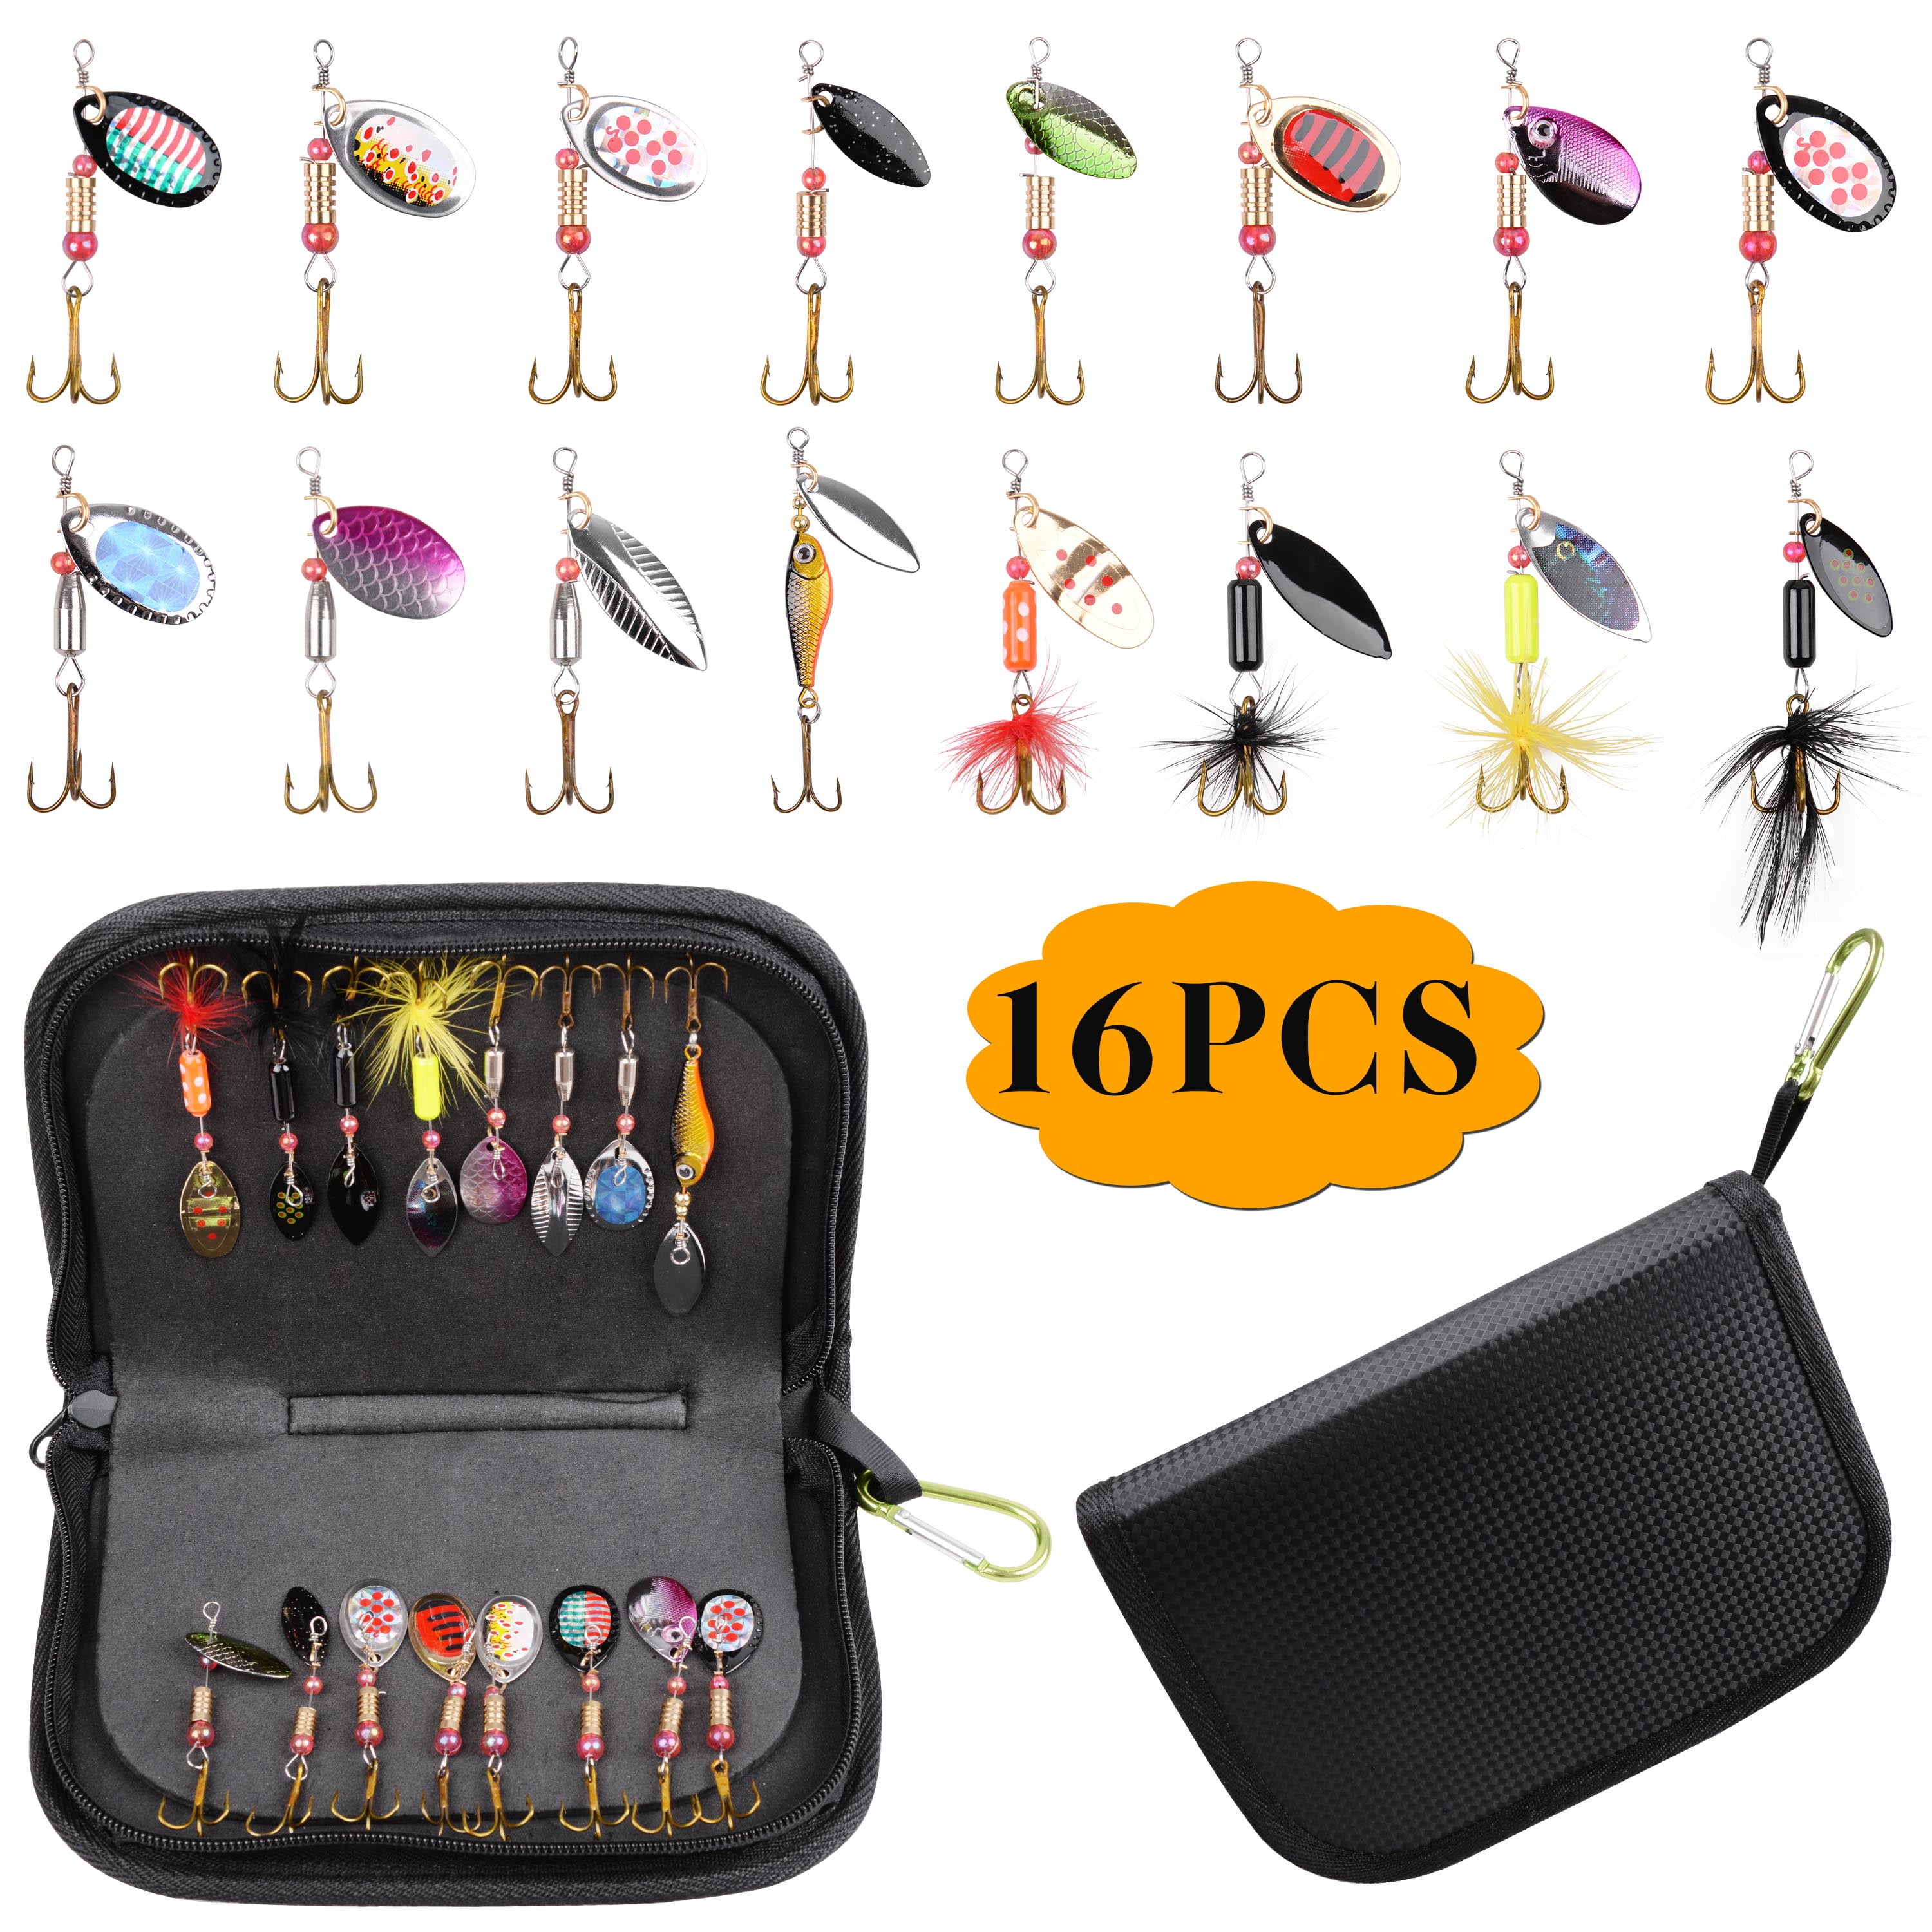 Fishing Lure Kit for Trout 16pcs Spinner Baits Feather Tail Spinner